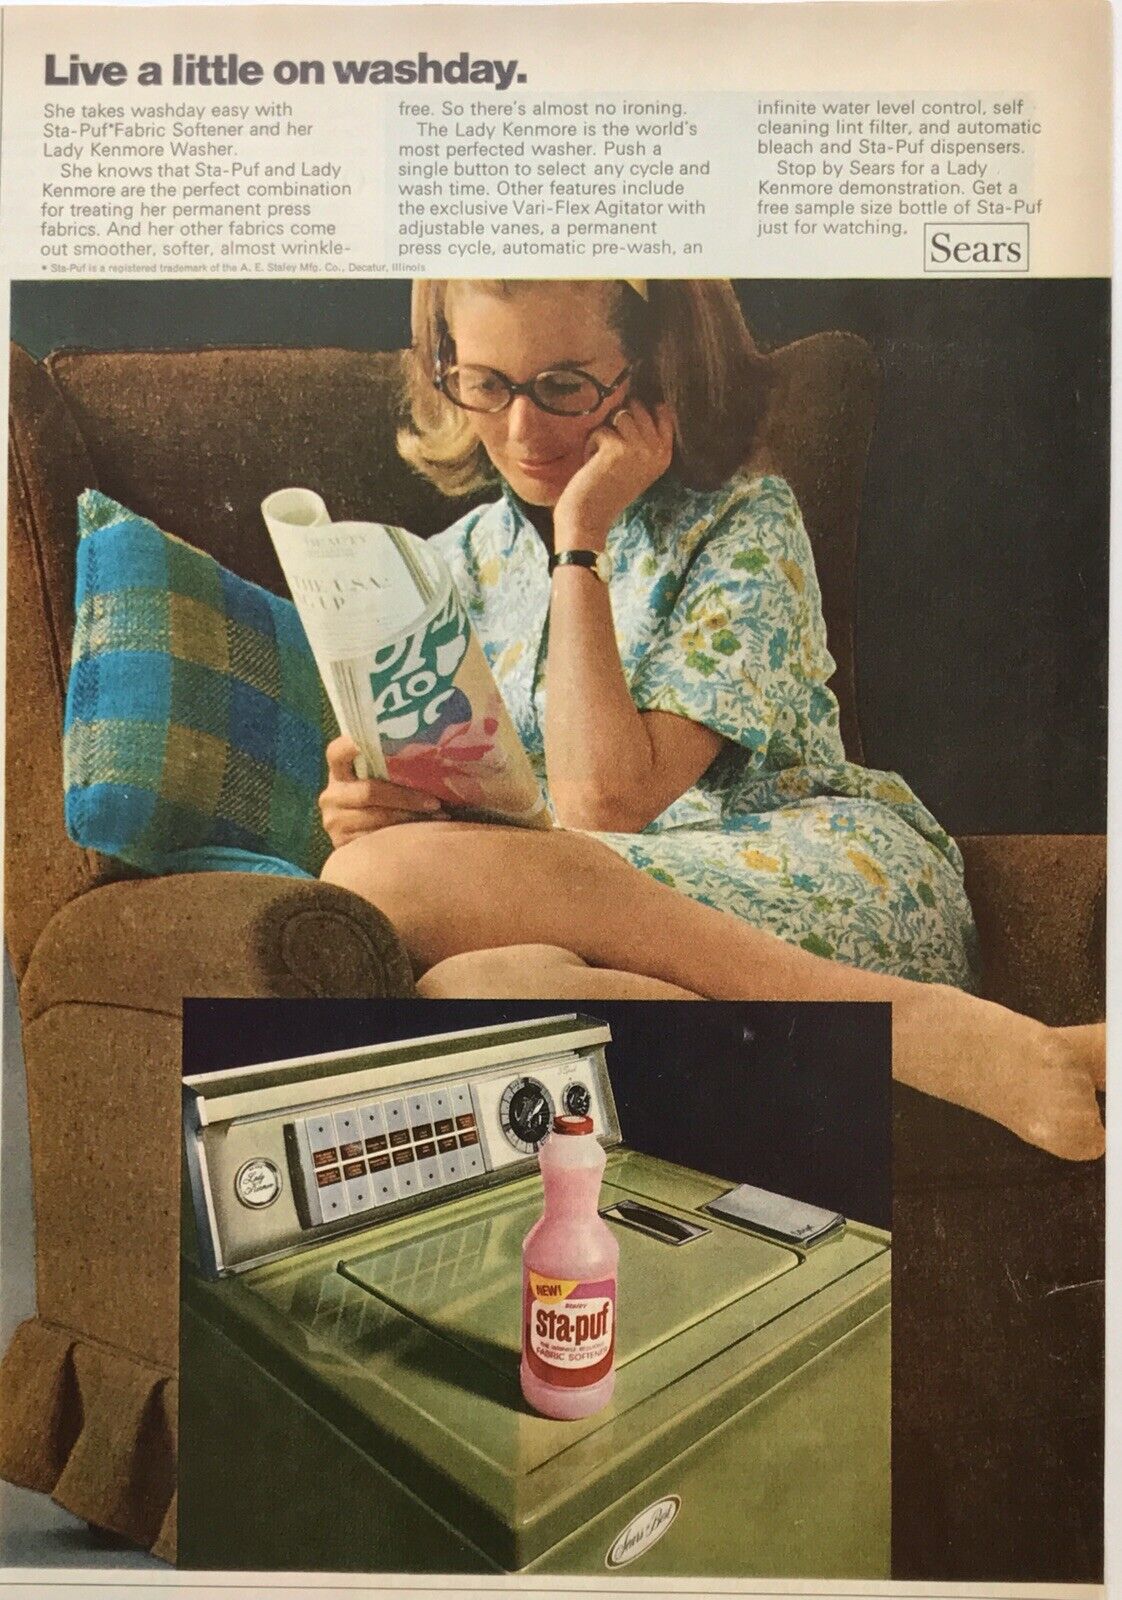 1968 Vintage Sears Lady Kenmore Washer - Orig. Color Print Ad 10” x 13-1/4” LHJ